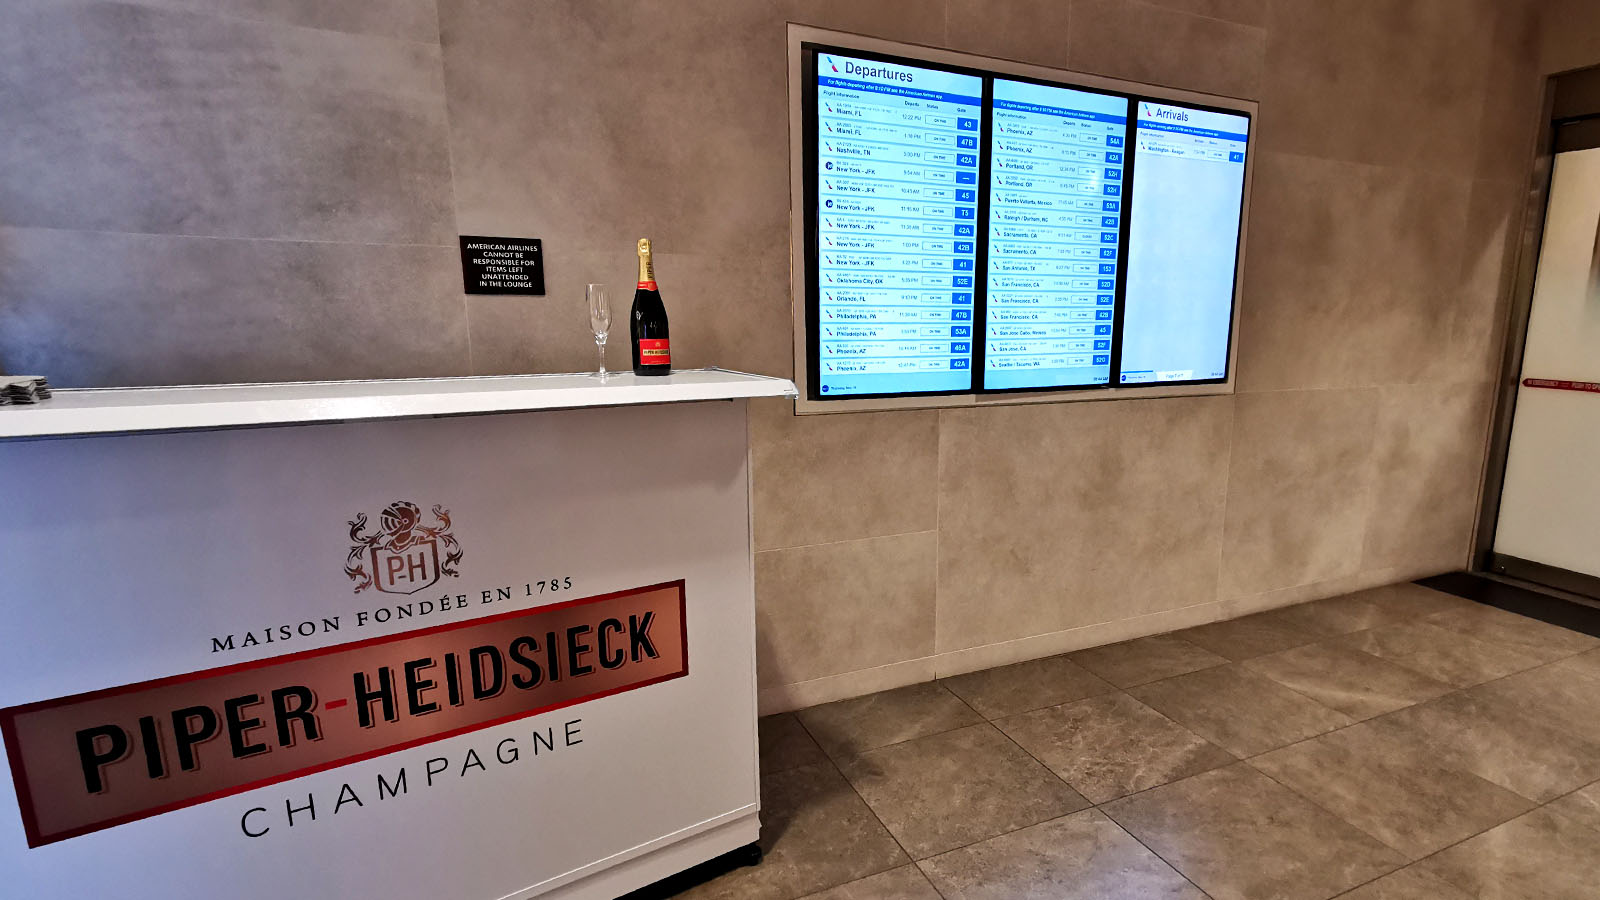 Wine station in the American Airlines Flagship Lounge, Los Angeles